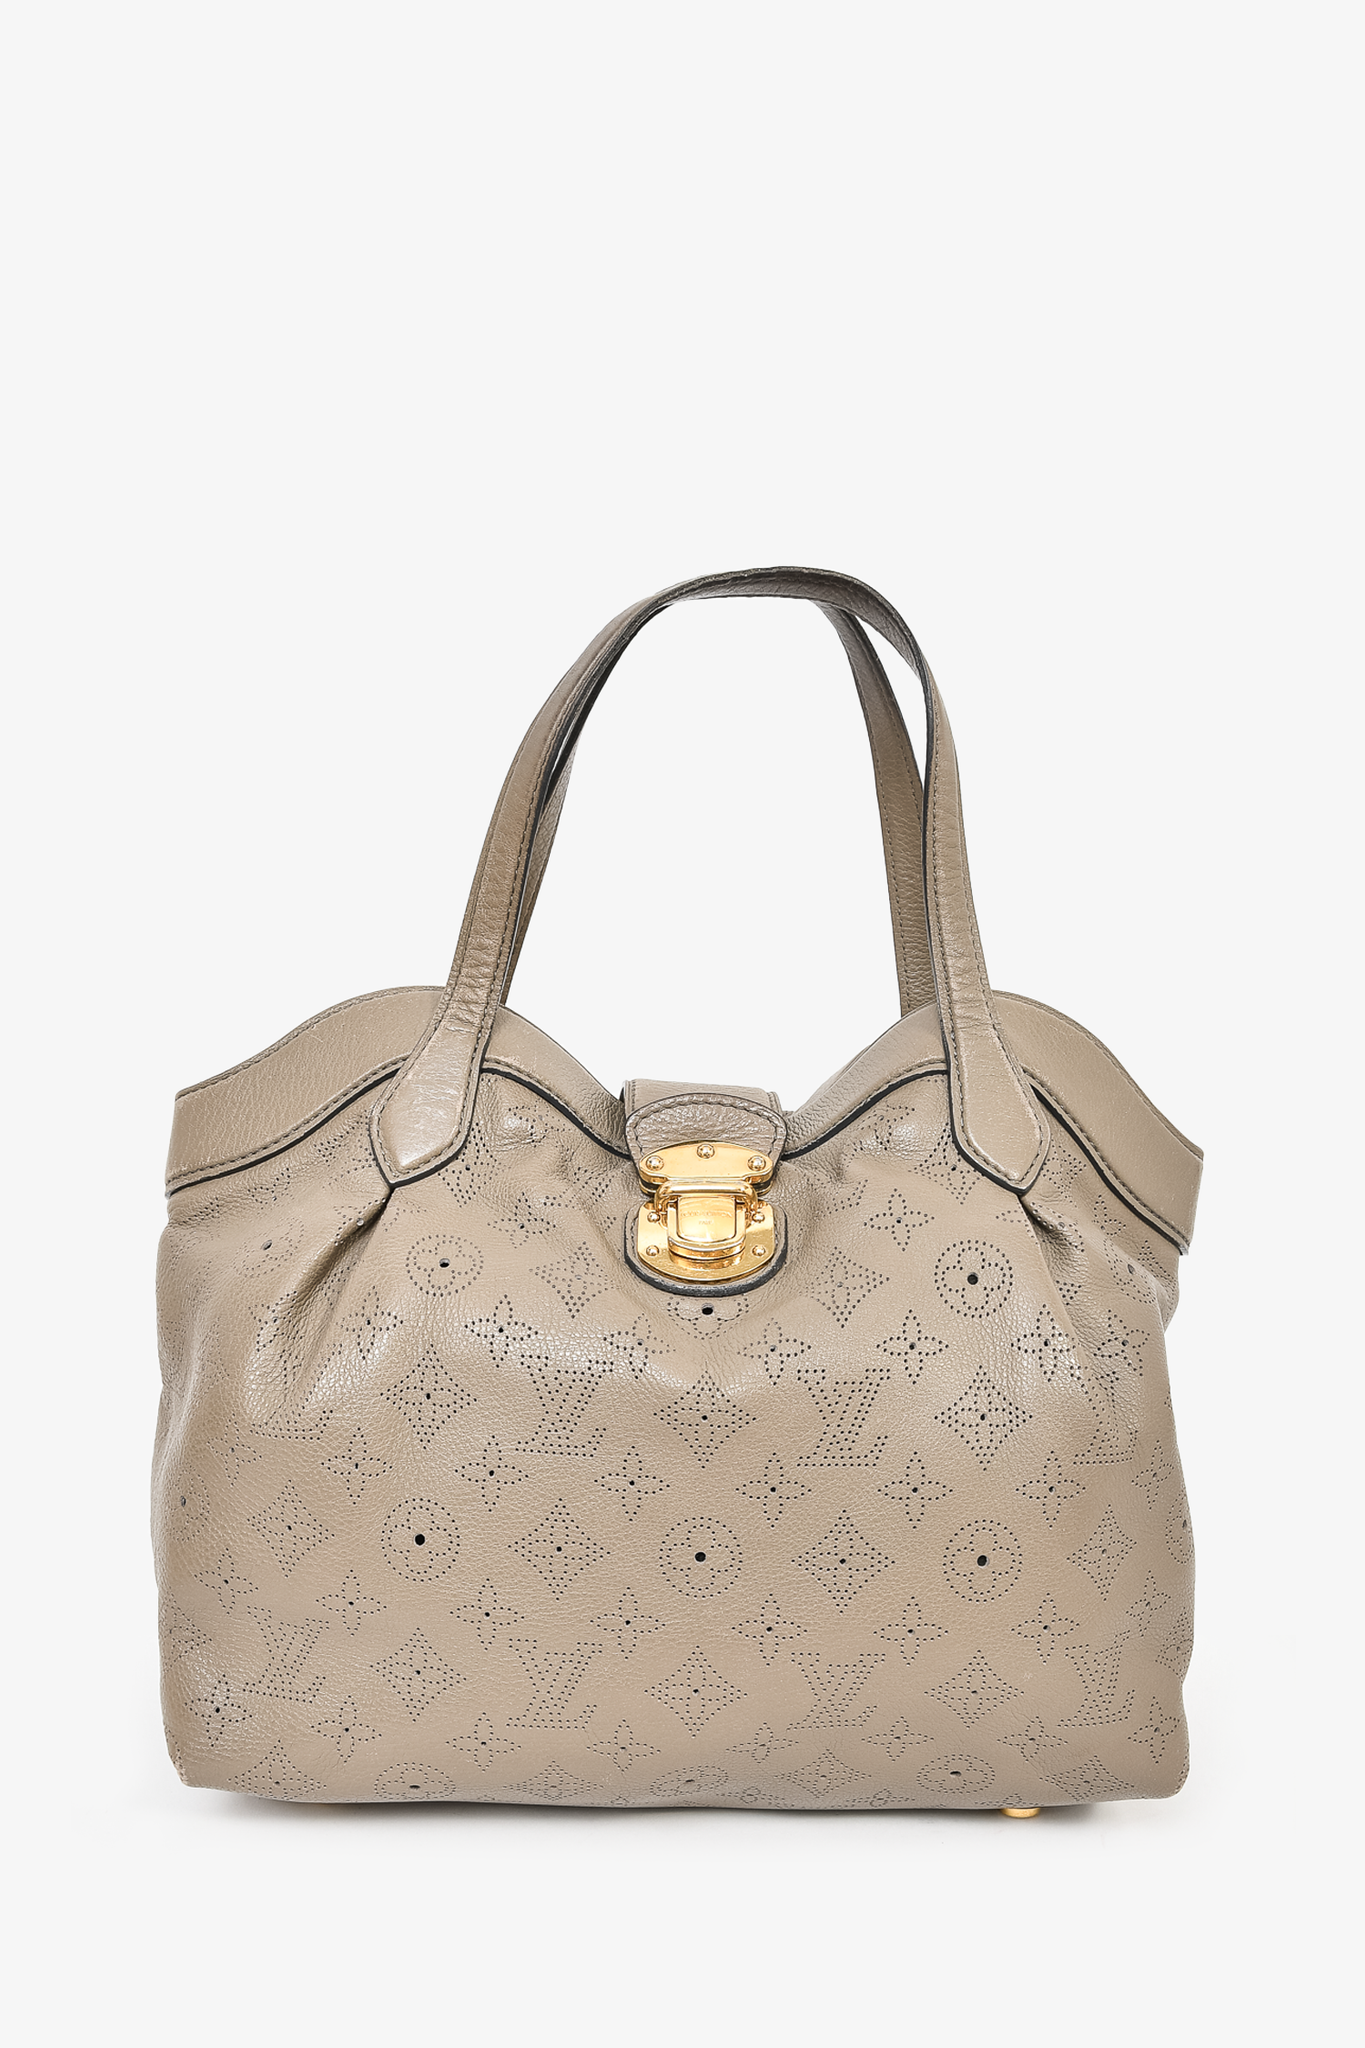 Red Monogram Jokes Man Crazy in Monogram Canvas with Gold Hardware, 2008, Holiday Handbags & Accessories, 2020